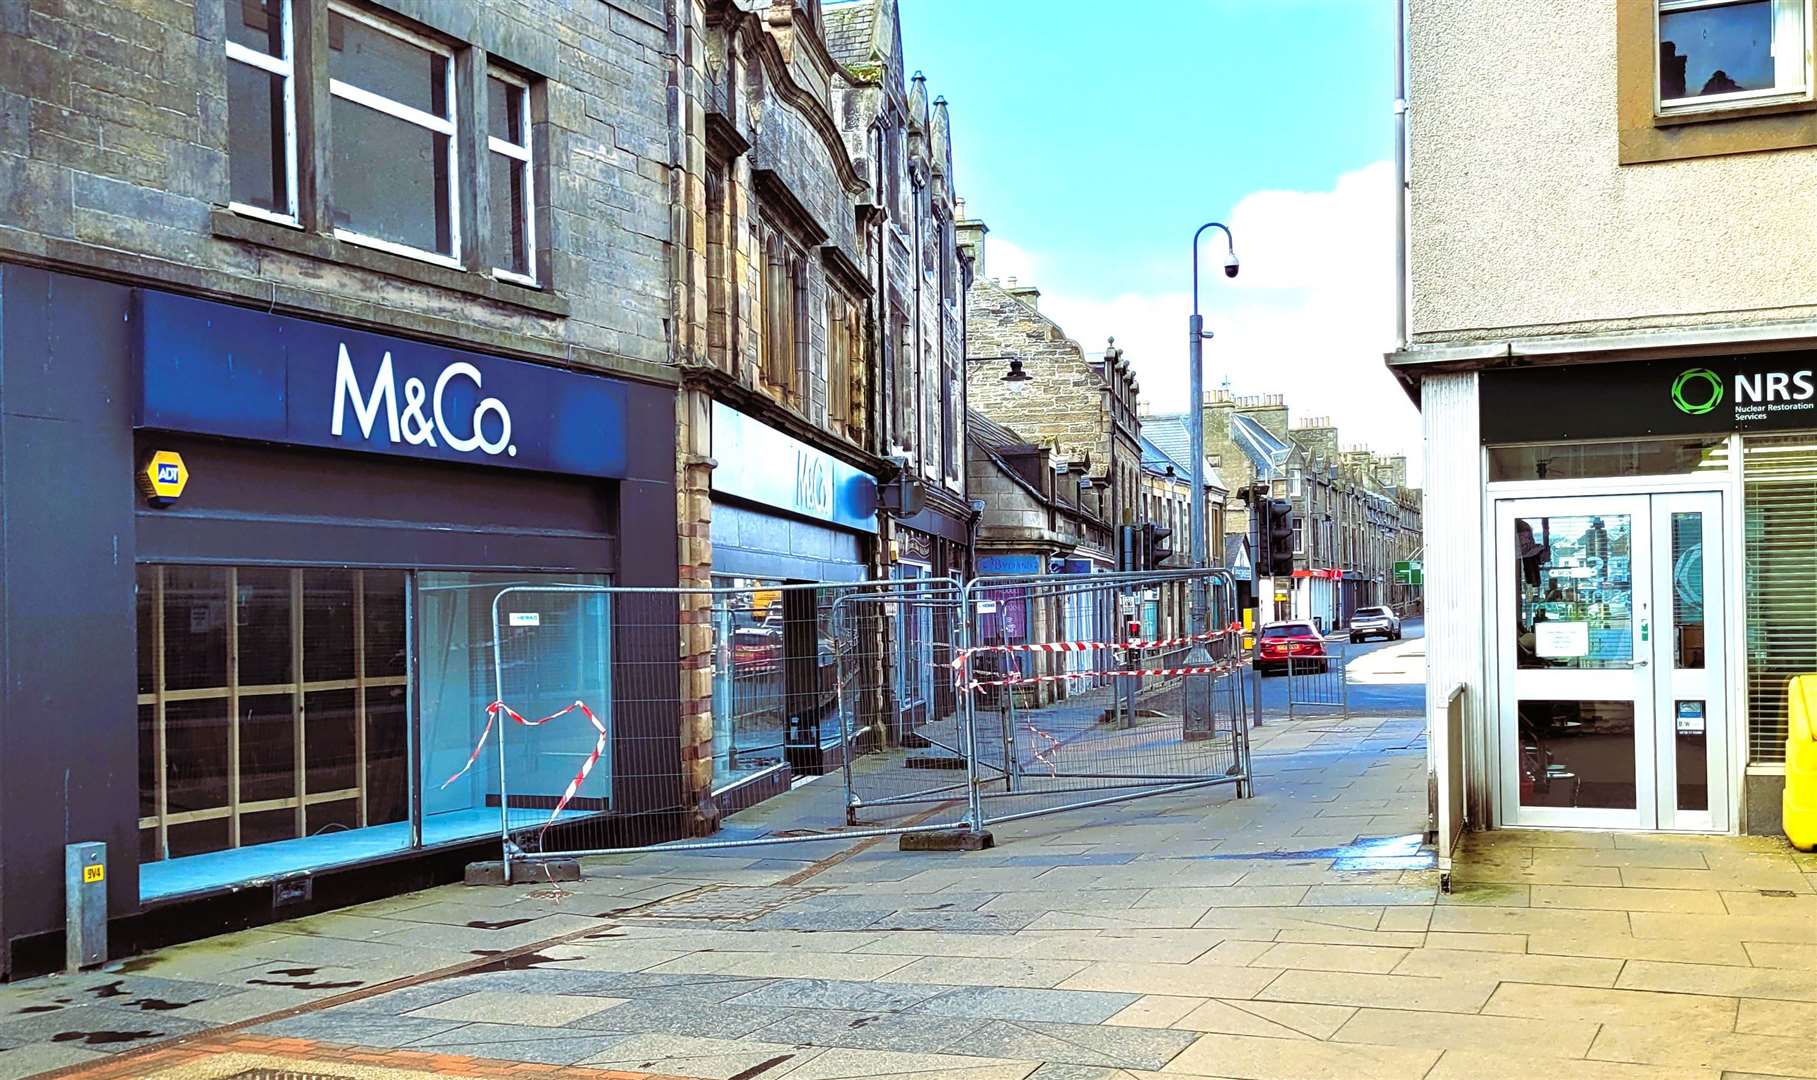 Fencing has been erected outside the old M&Co shop in Thurso. Picture: Alexander Glasgow